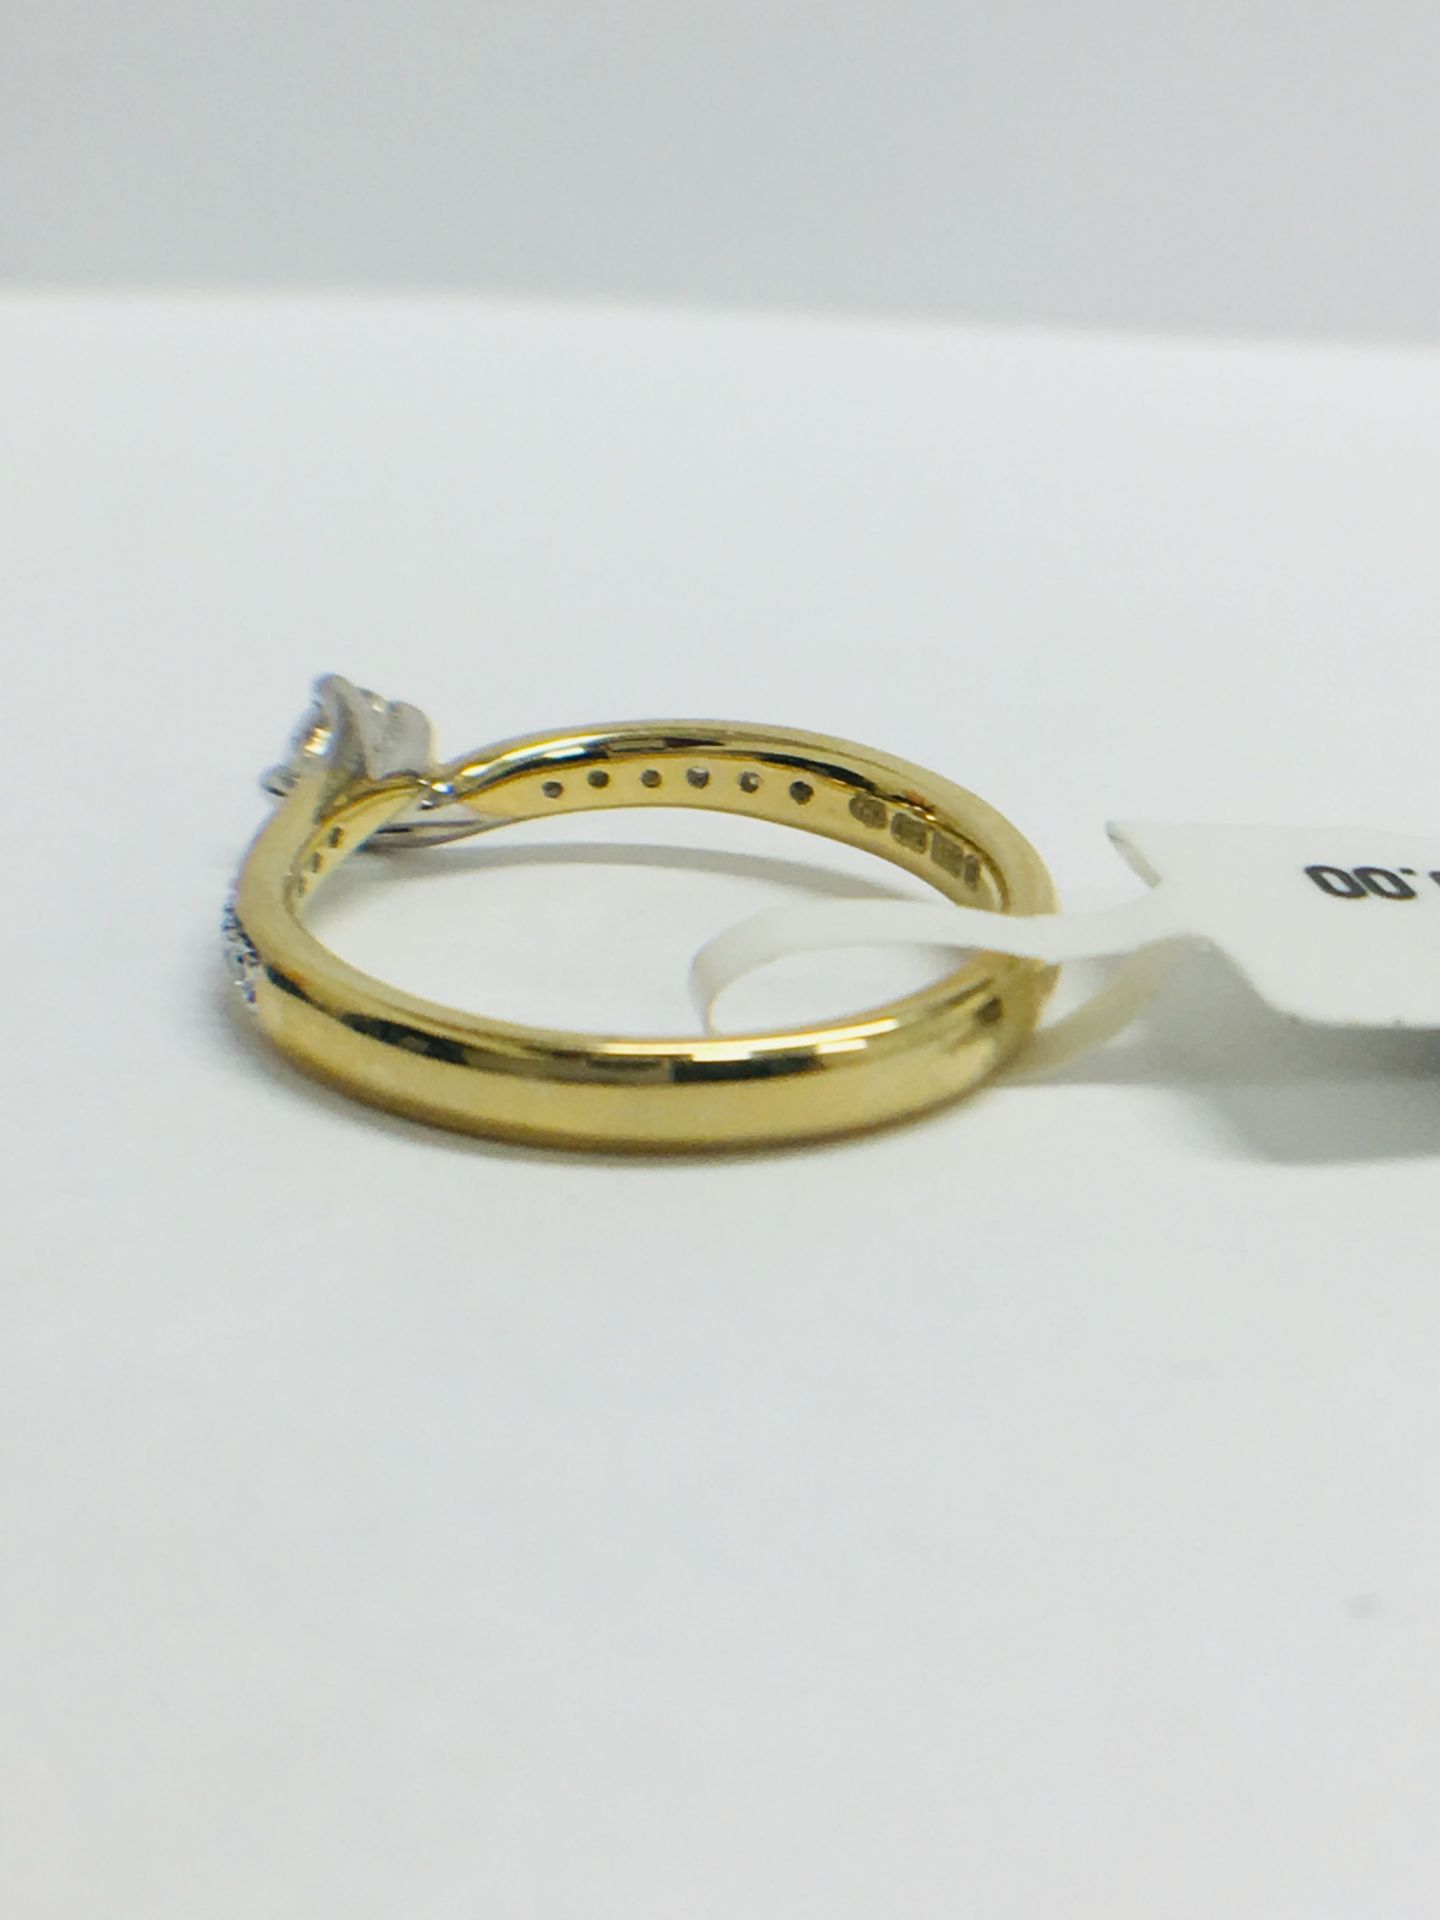 9ct Yellow Gold diamond Solitaire twist style ring - Image 5 of 11